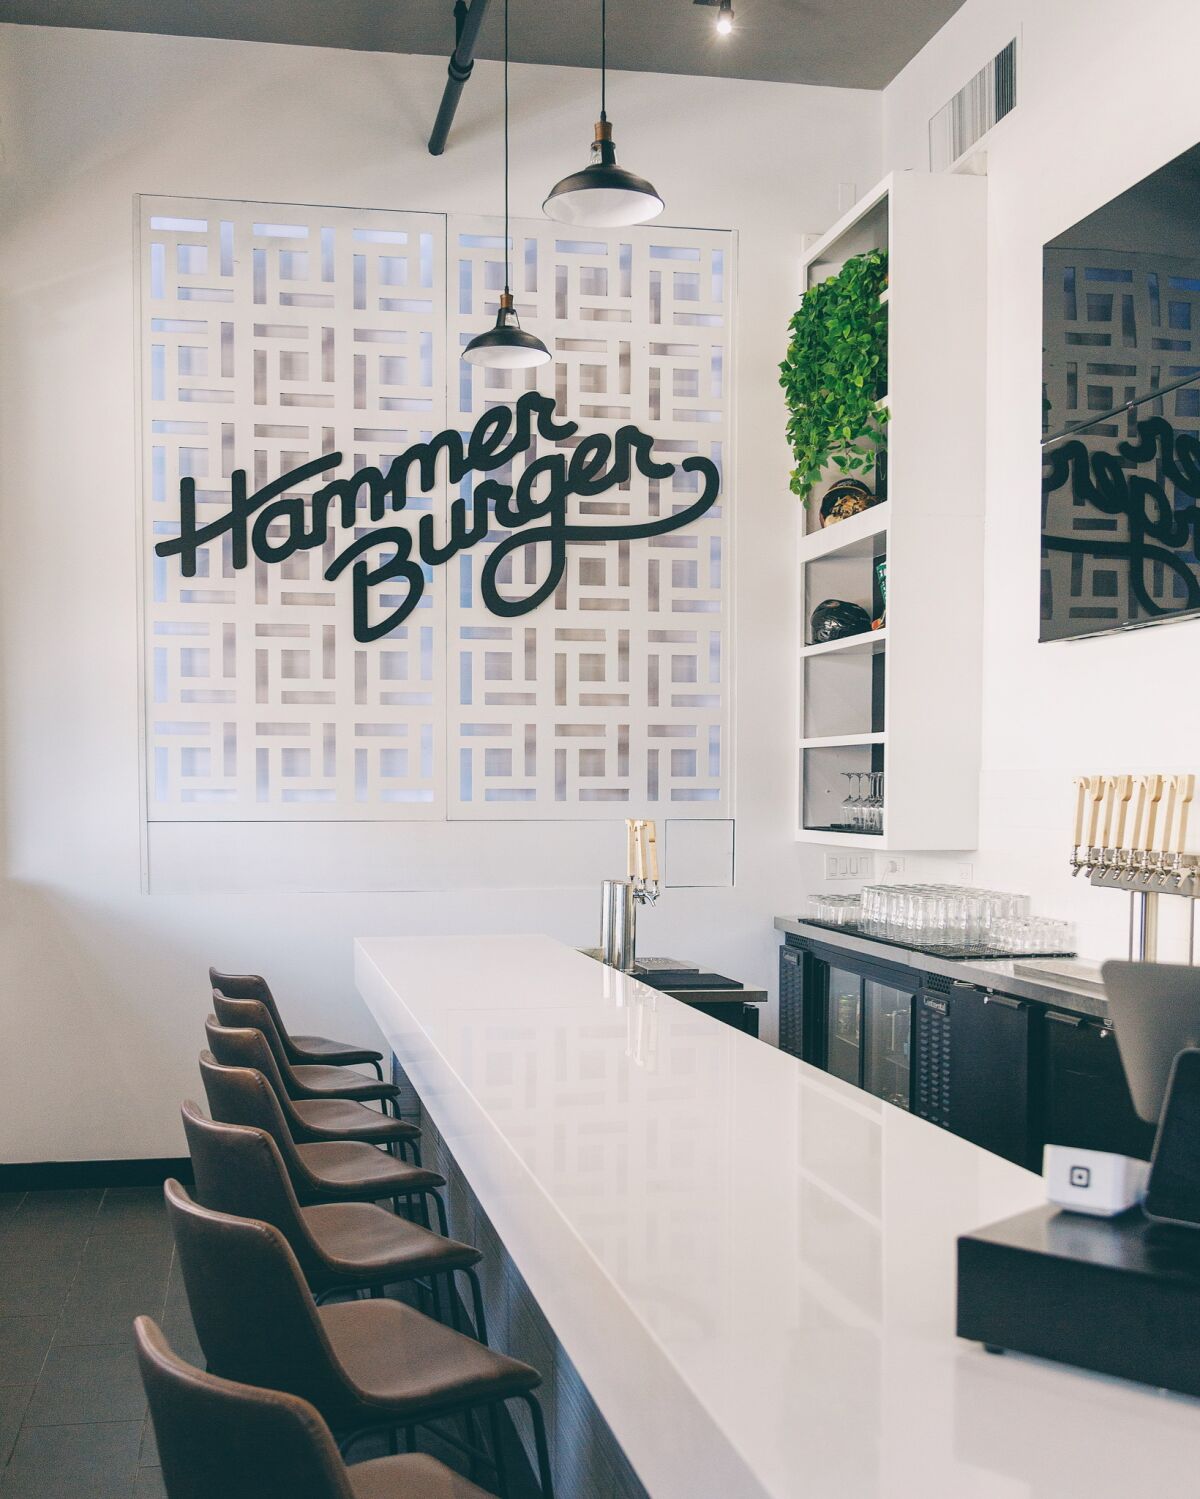 Hammer Burger’s first brick-and-mortar location opens in downtown Santa Ana on May 5.